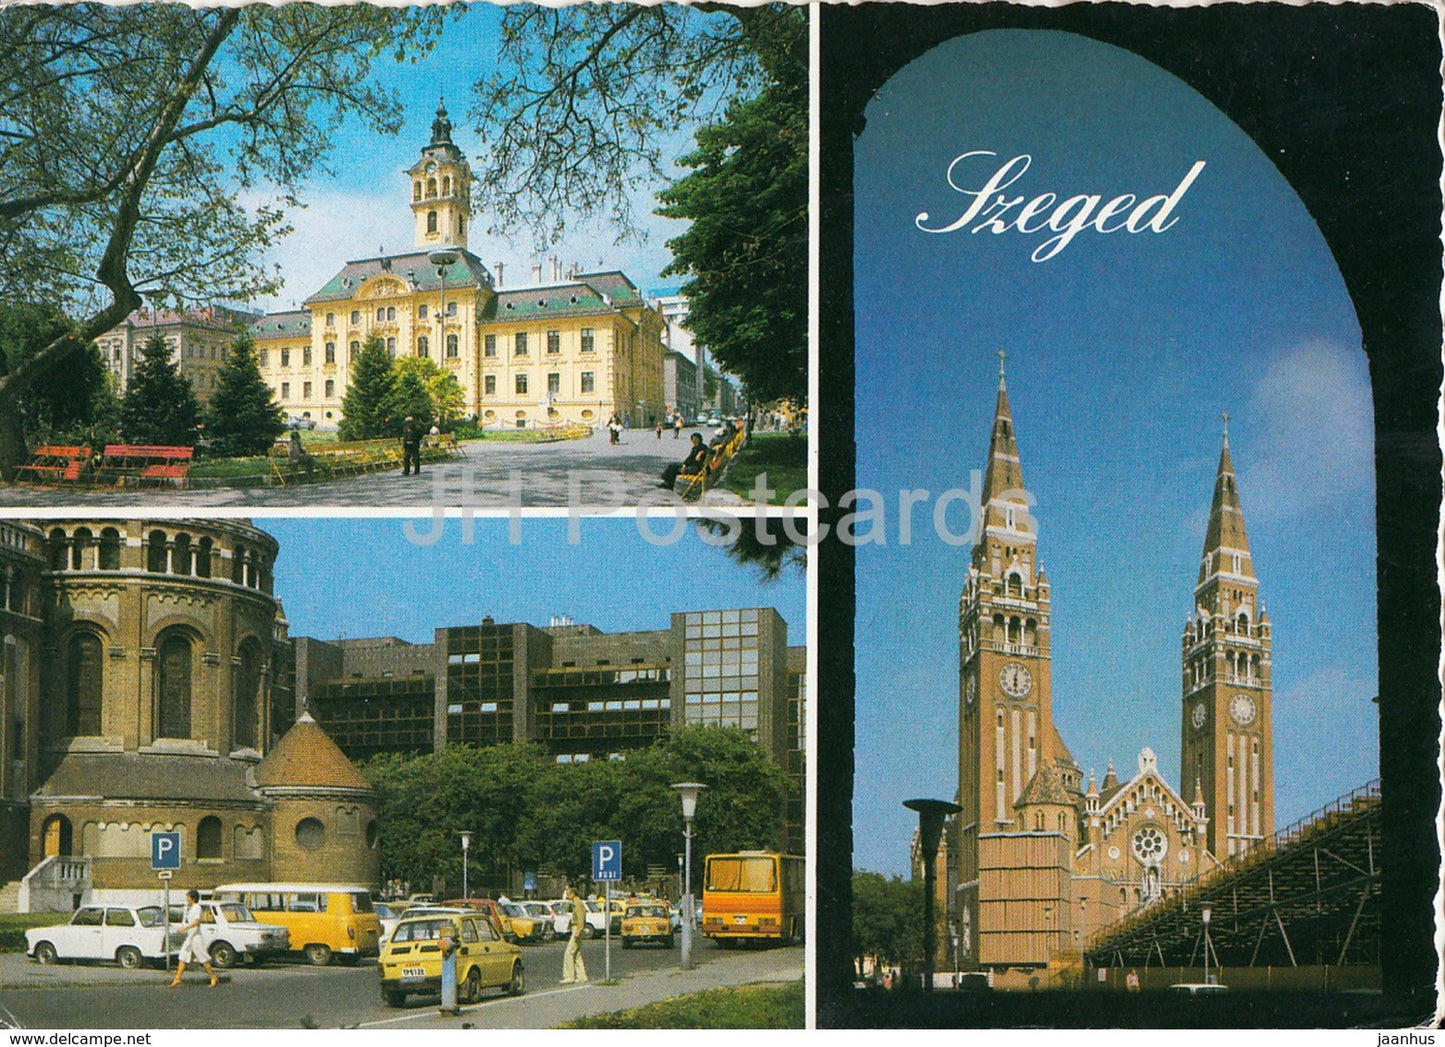 Szeged - architecture - cathedral - bus Ikarus - cars - multiview - 1980s - Hungary - used - JH Postcards